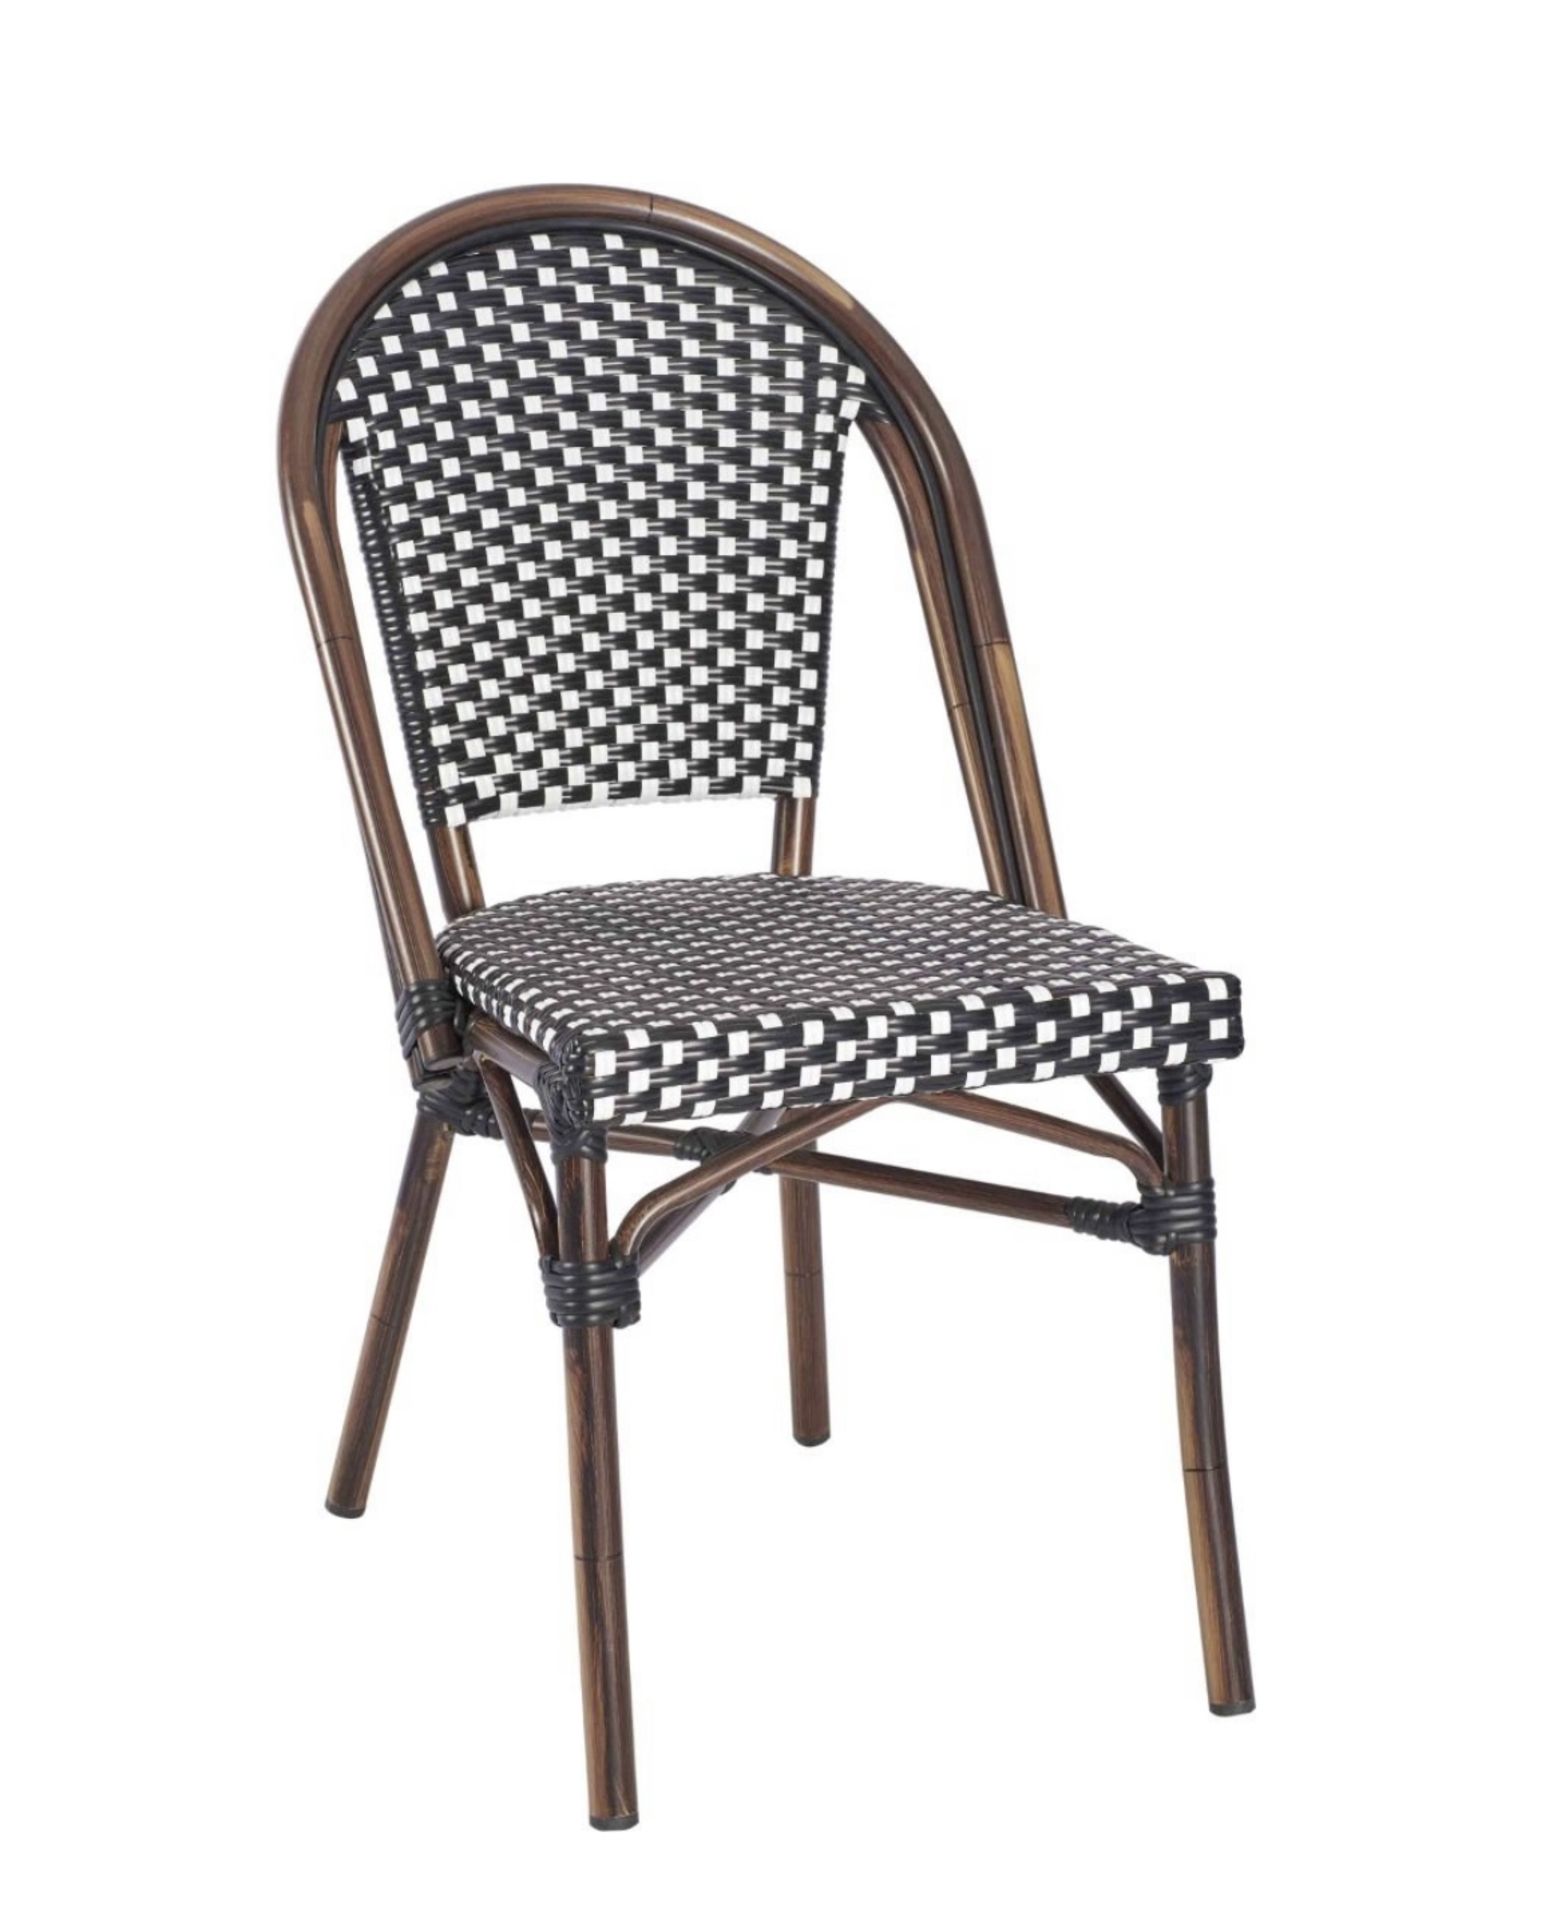 X4 BRAND NEW OUTDOOR FRENCH STYLE CHAIR HIGH QUALITY